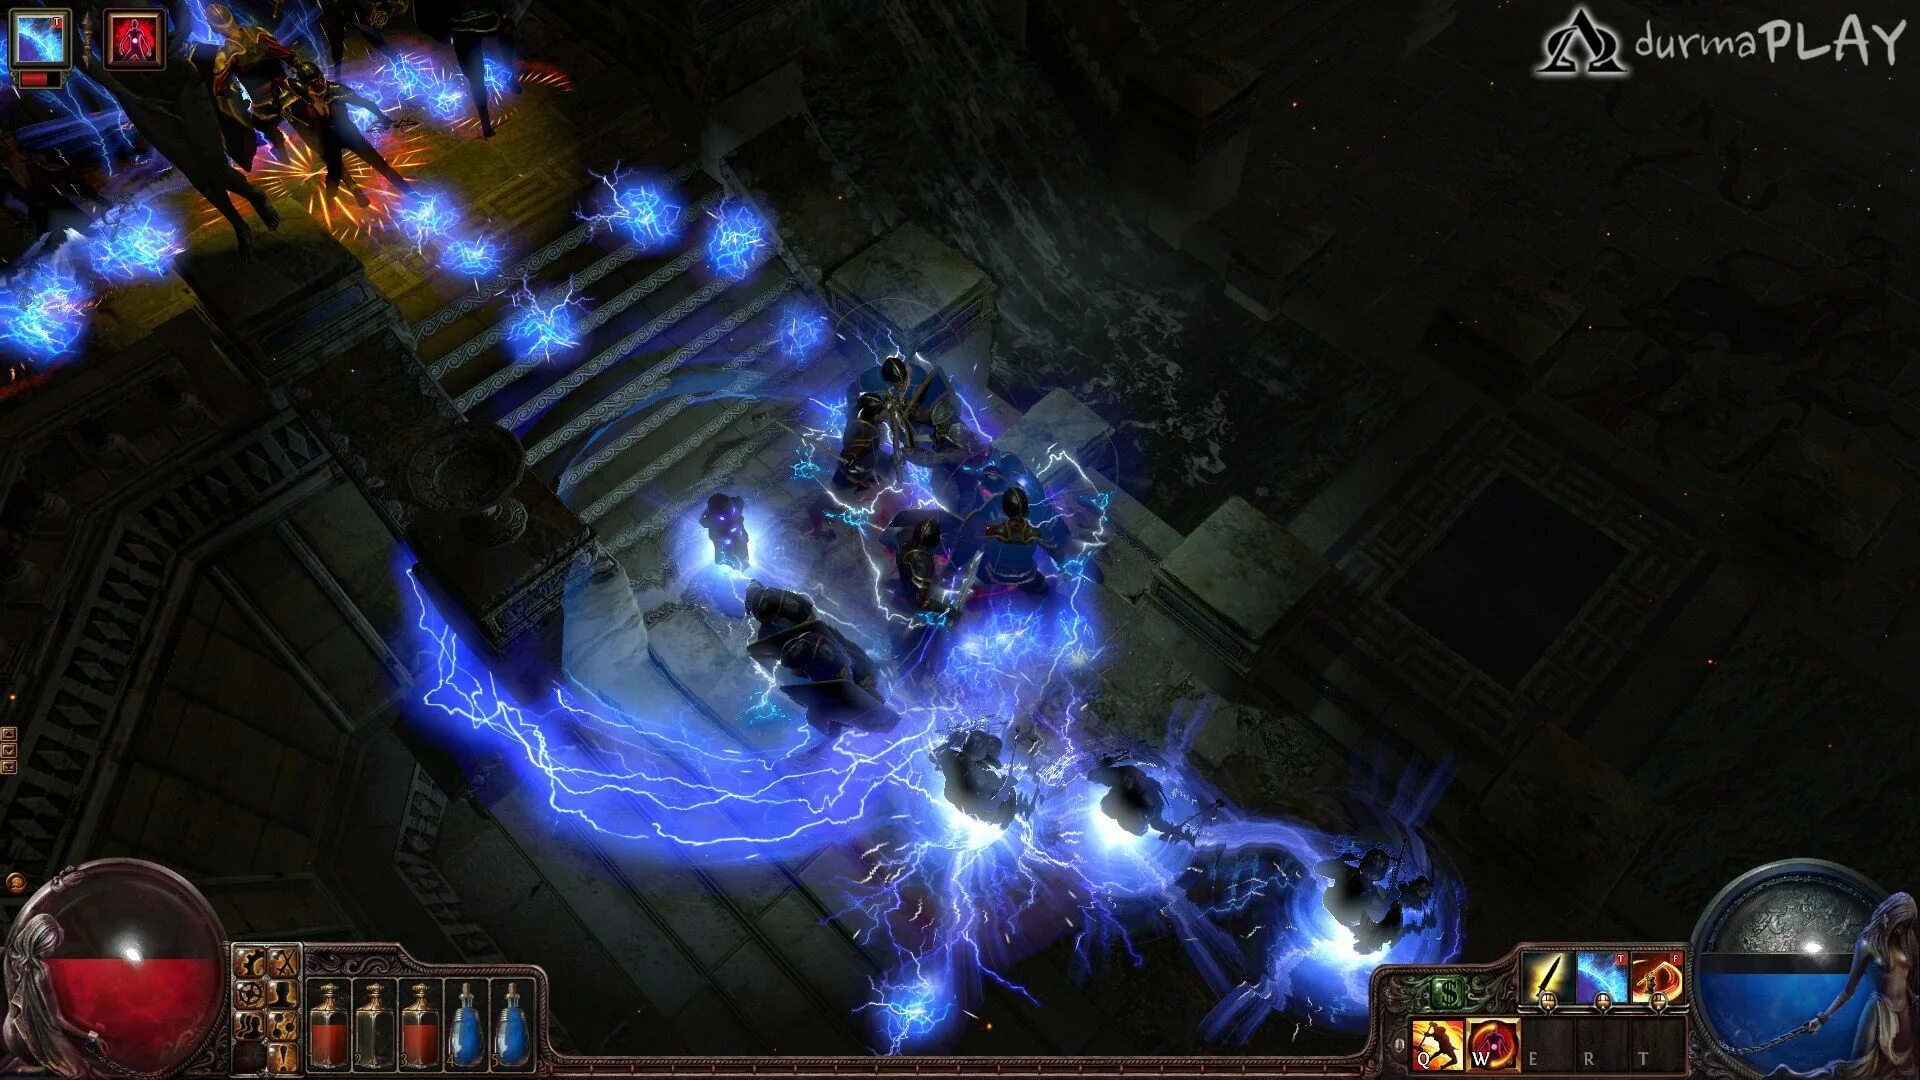 Adorned poe. Pach of Exel. Игра Pass of Exile. Path of Exile Скриншоты. Path of Exile 2013.